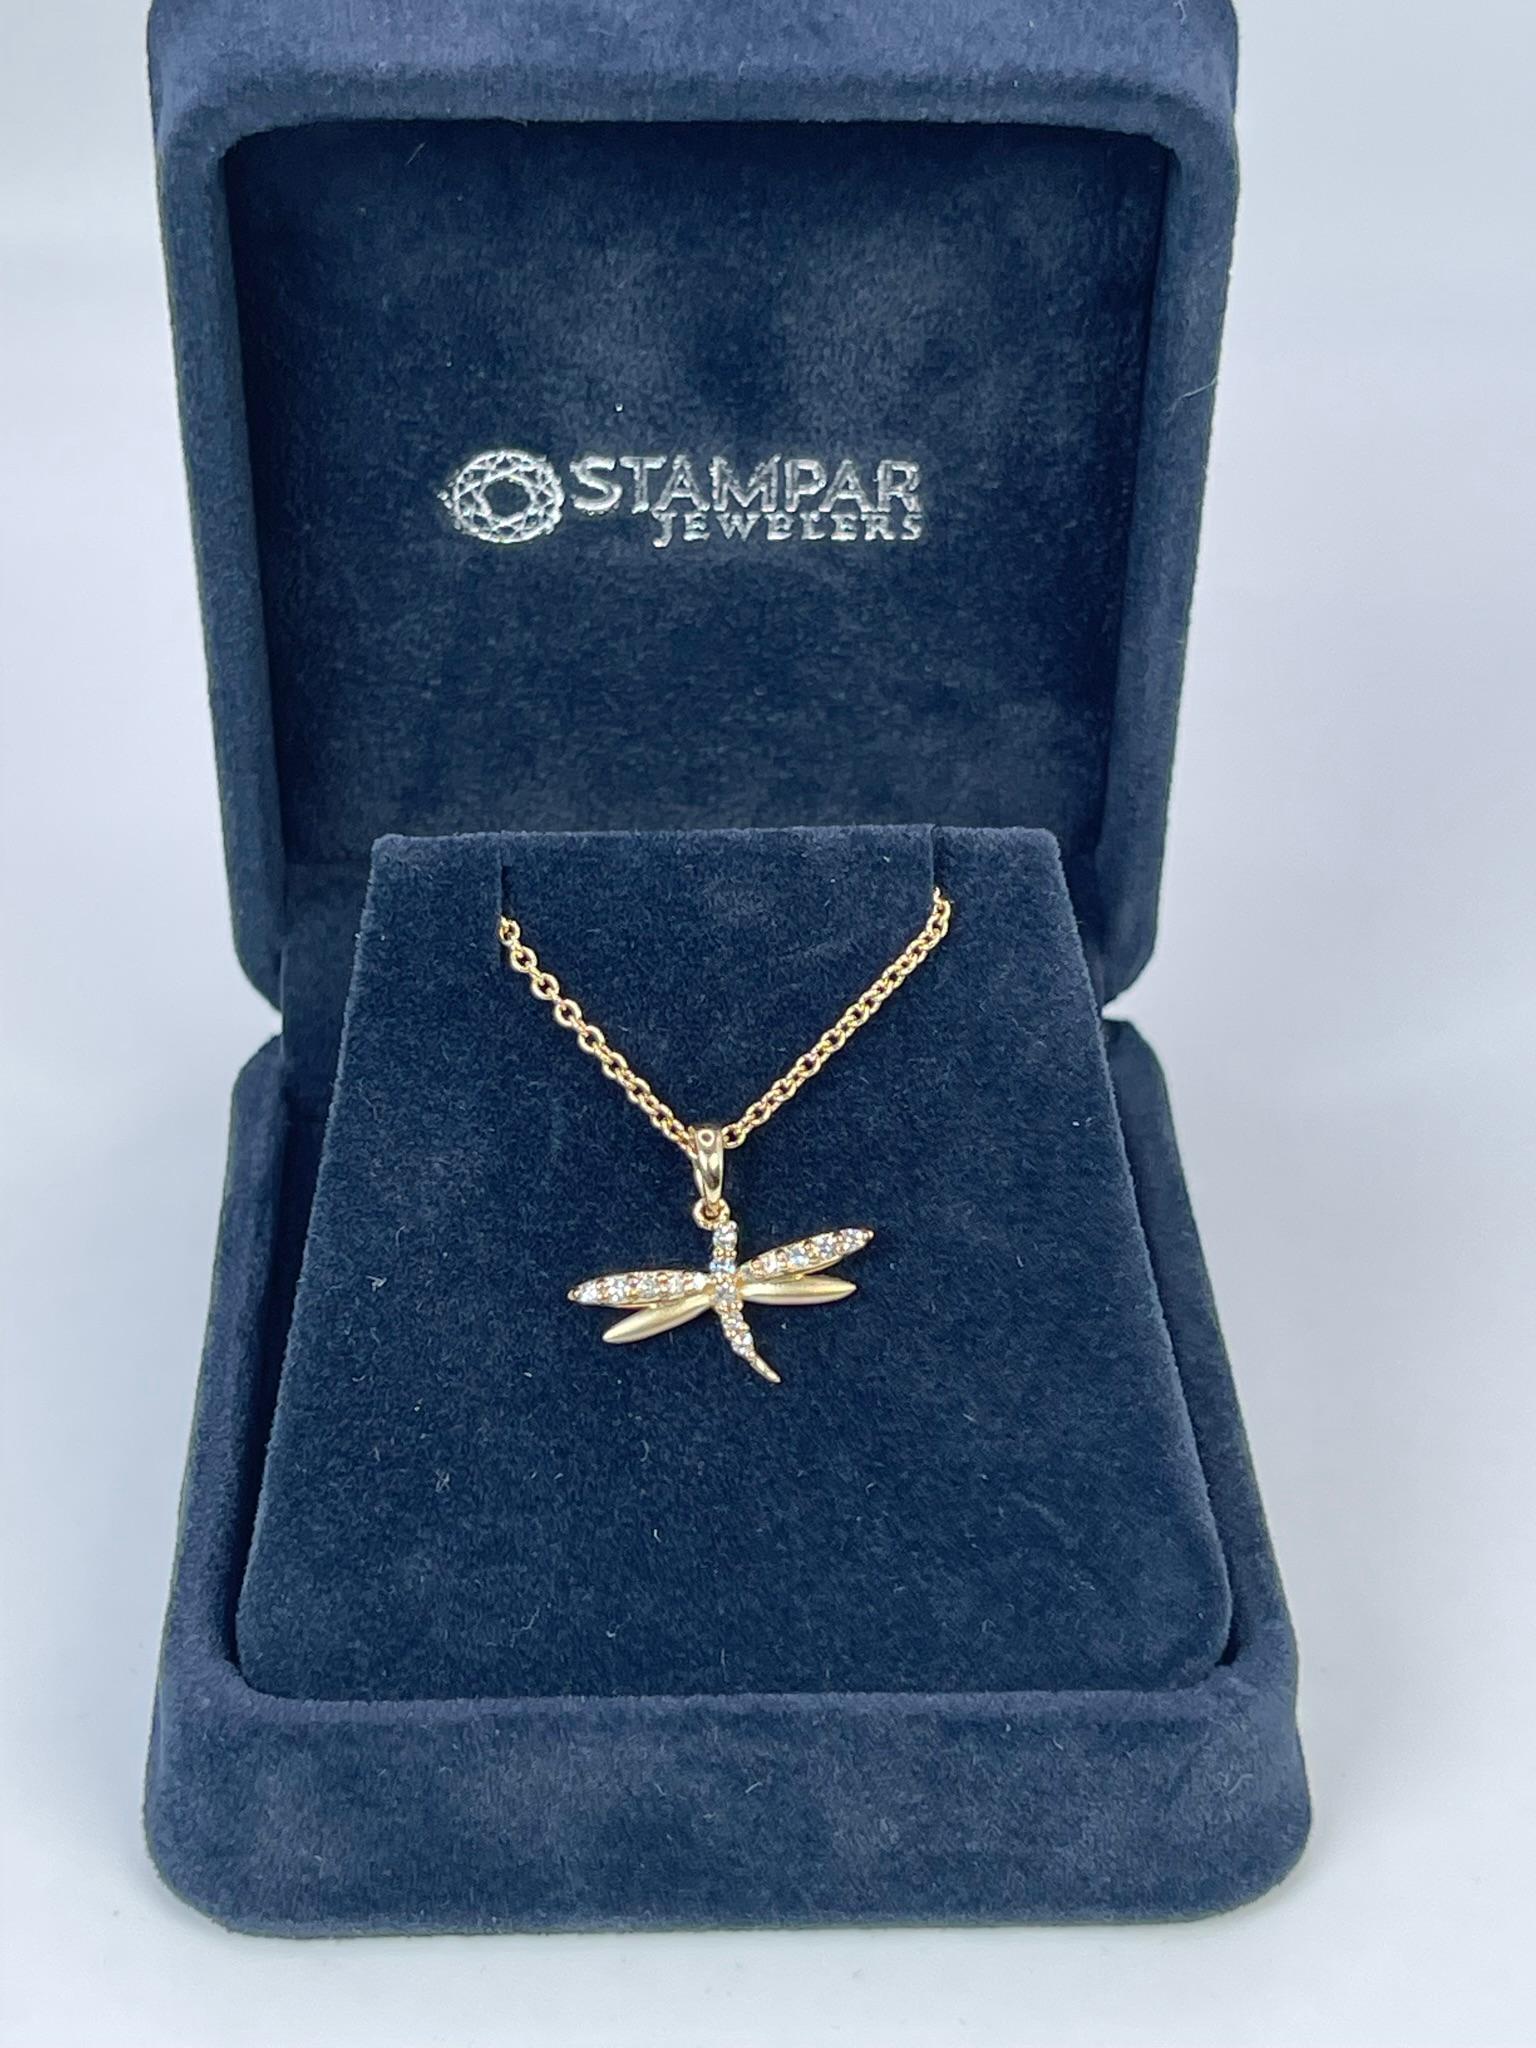 Round Cut Dragonfly Diamond Pendant Necklace 14KT Yellow Gold Cute Dainty Pendant For Sale